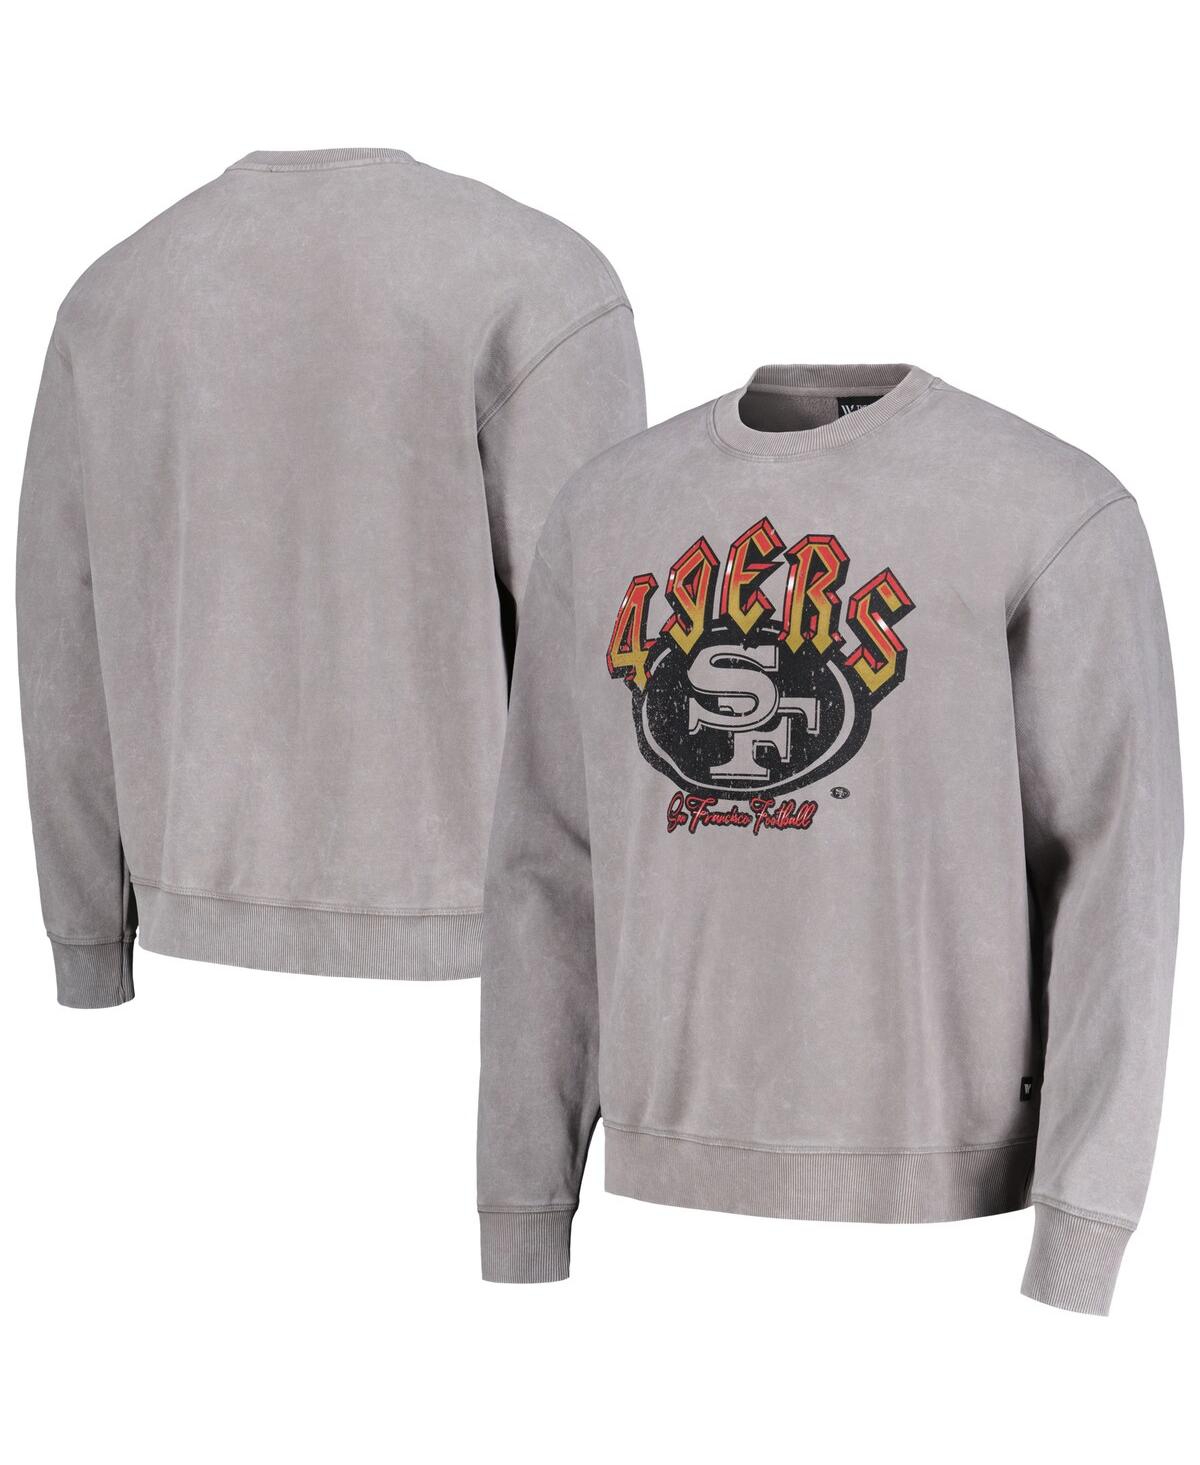 Men's and Women's The Wild Collective Gray San Francisco 49ers Distressed Pullover Sweatshirt - Gray